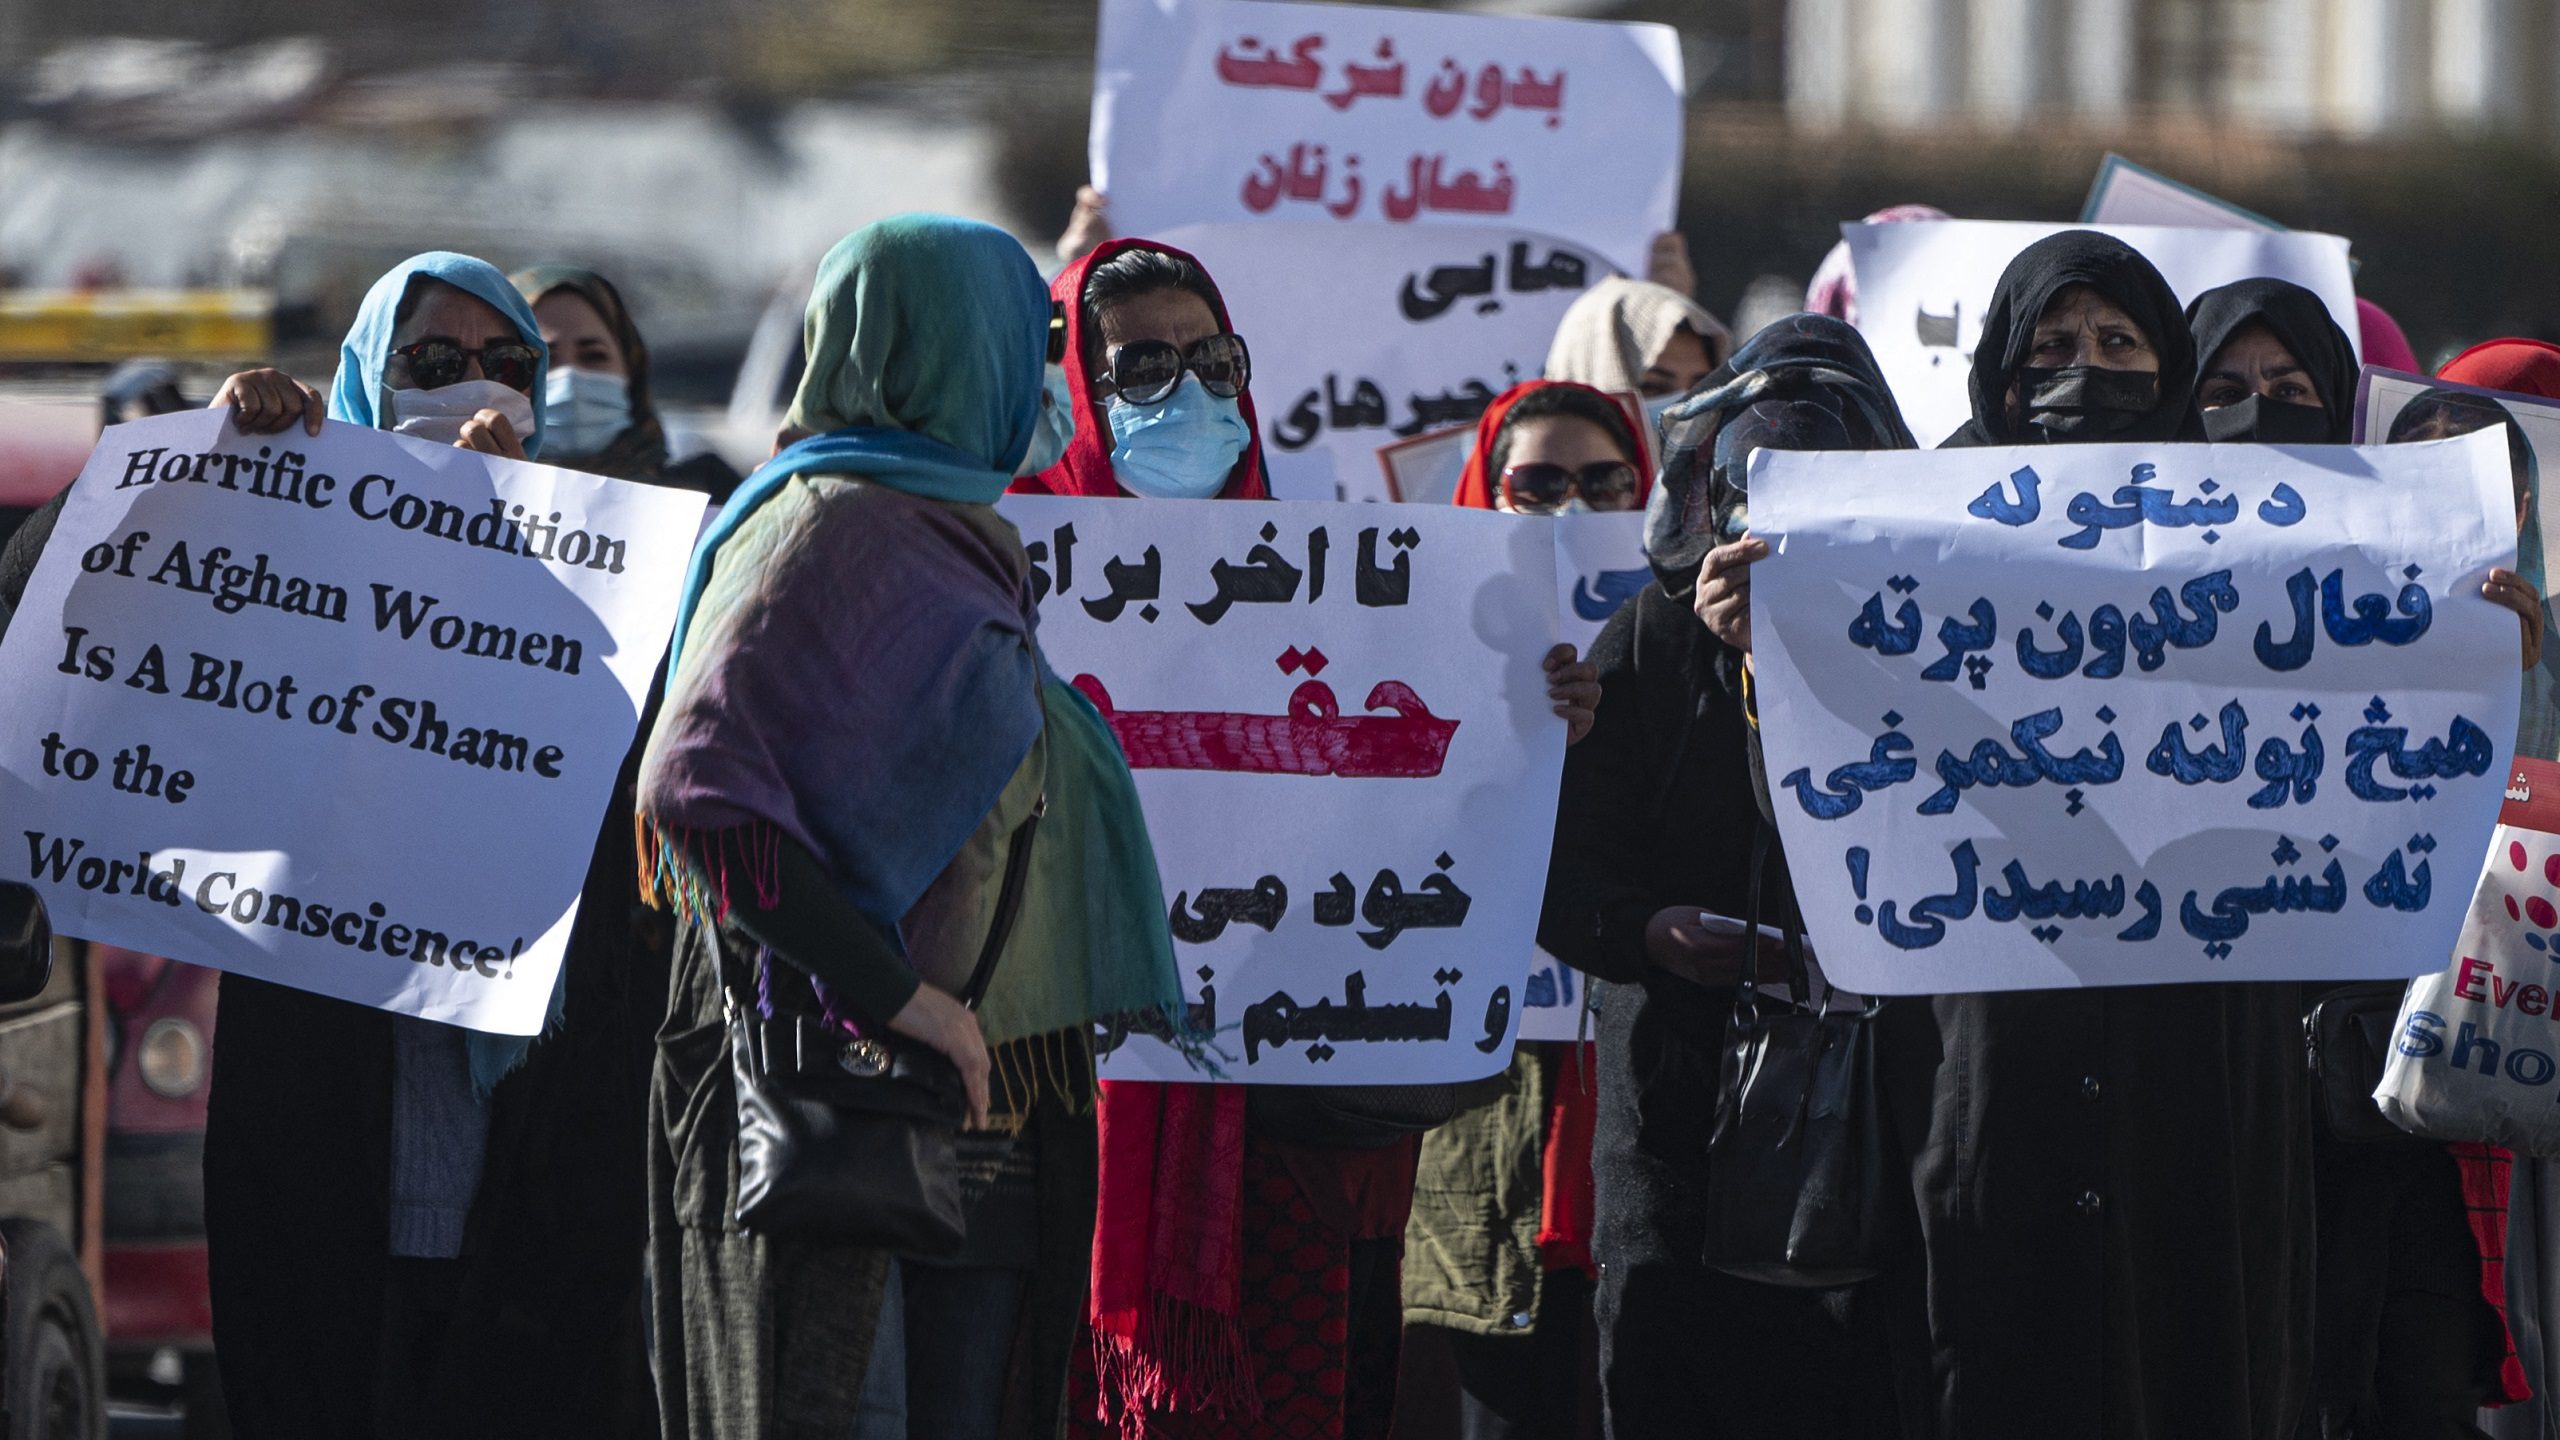 Afghan Women March in Kabul To Protest Their ‘Horrific Condition’